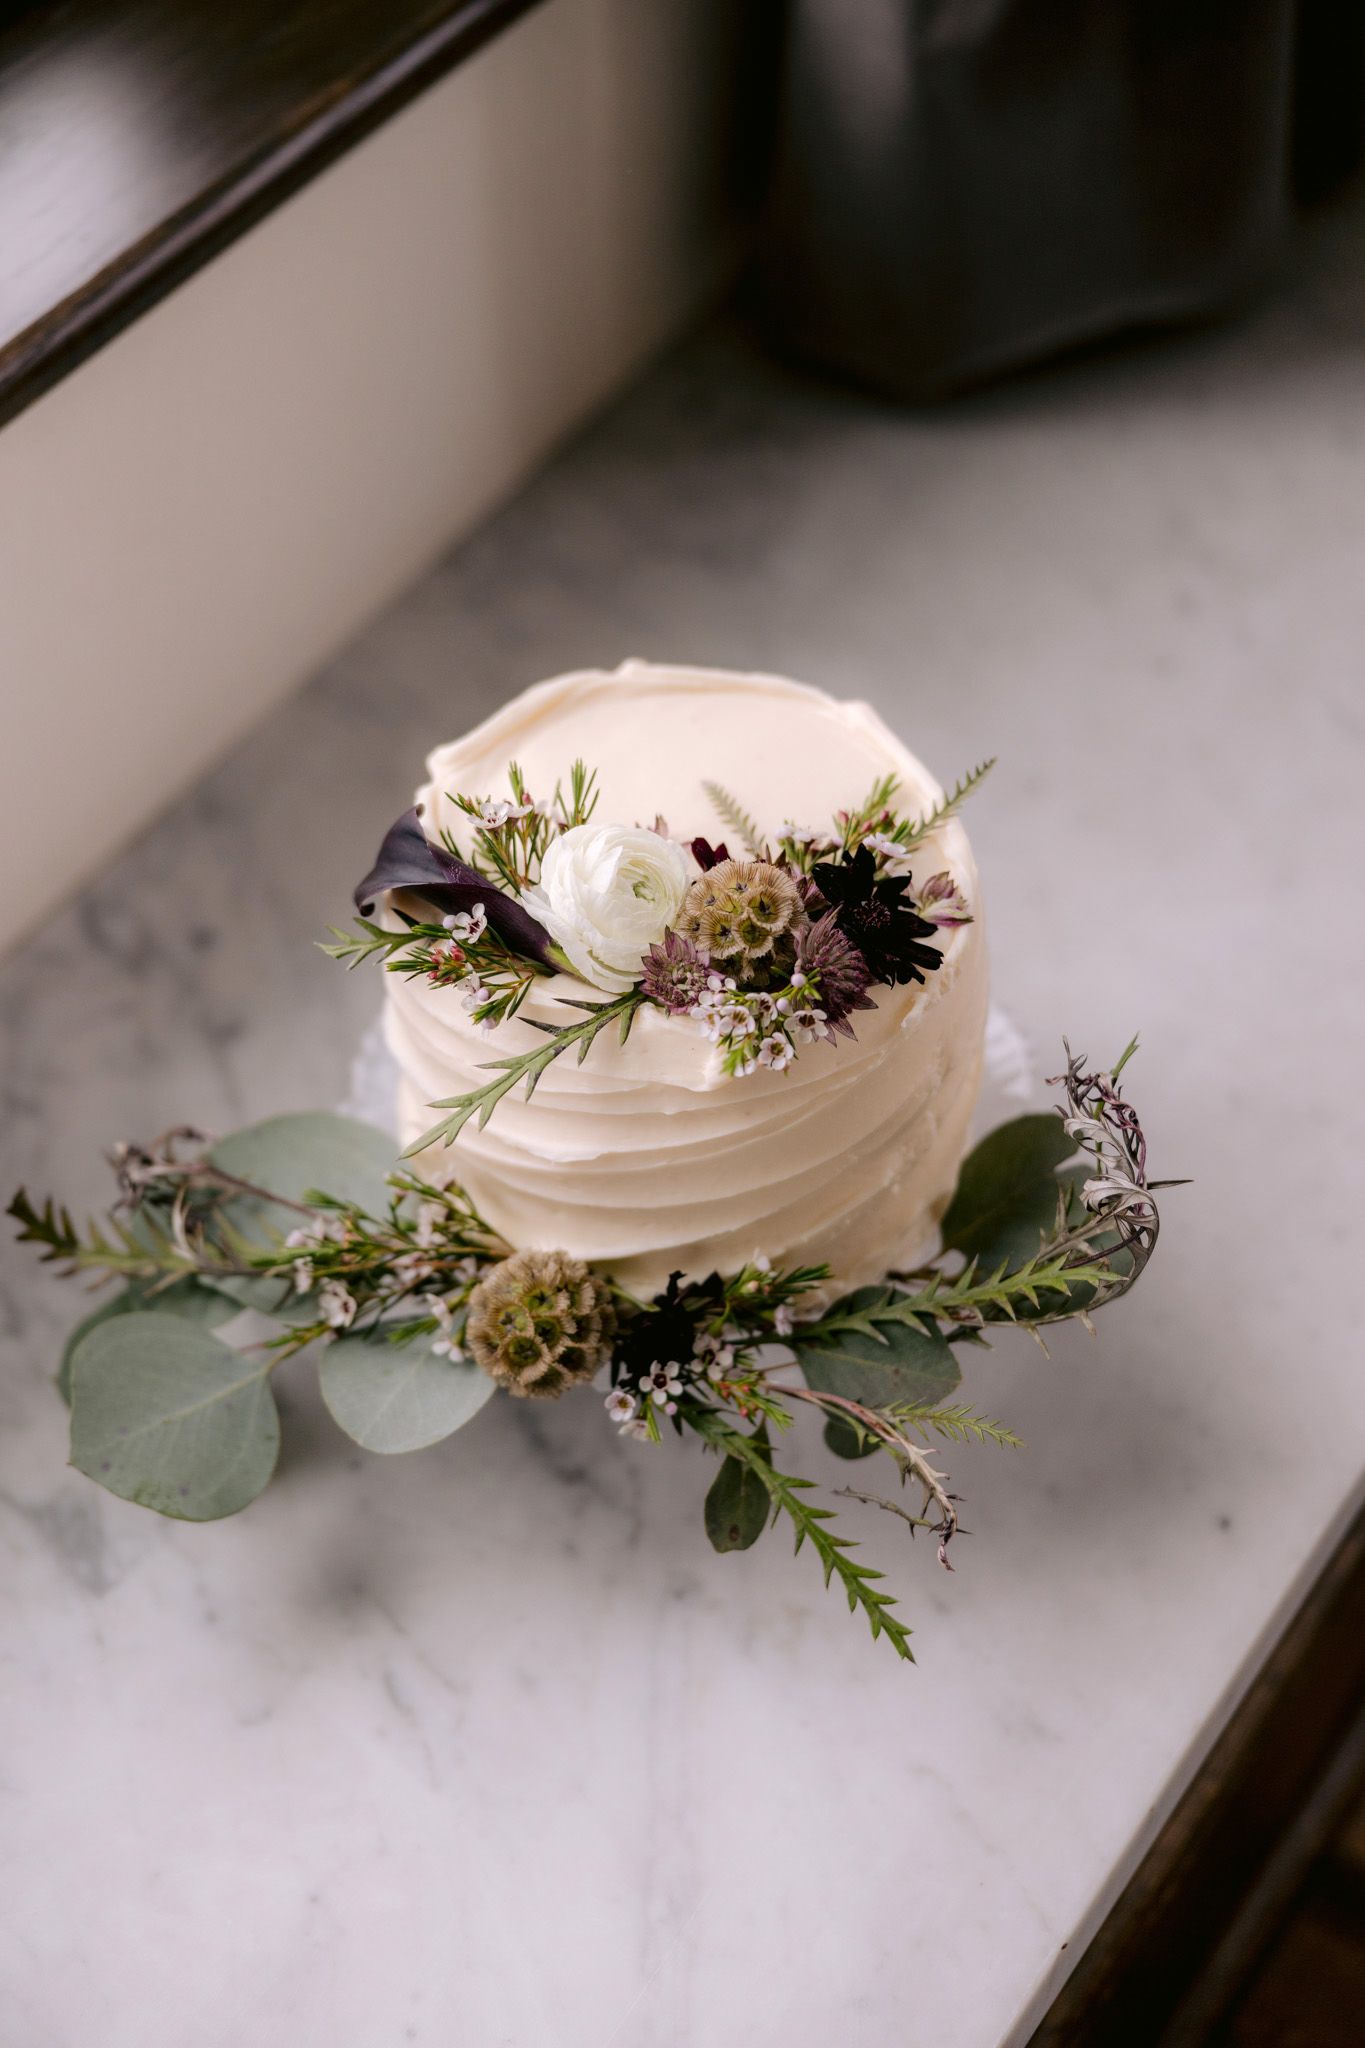 A beautiful small wedding cake for an NYC elopement. Image by Jenny Fu Studio